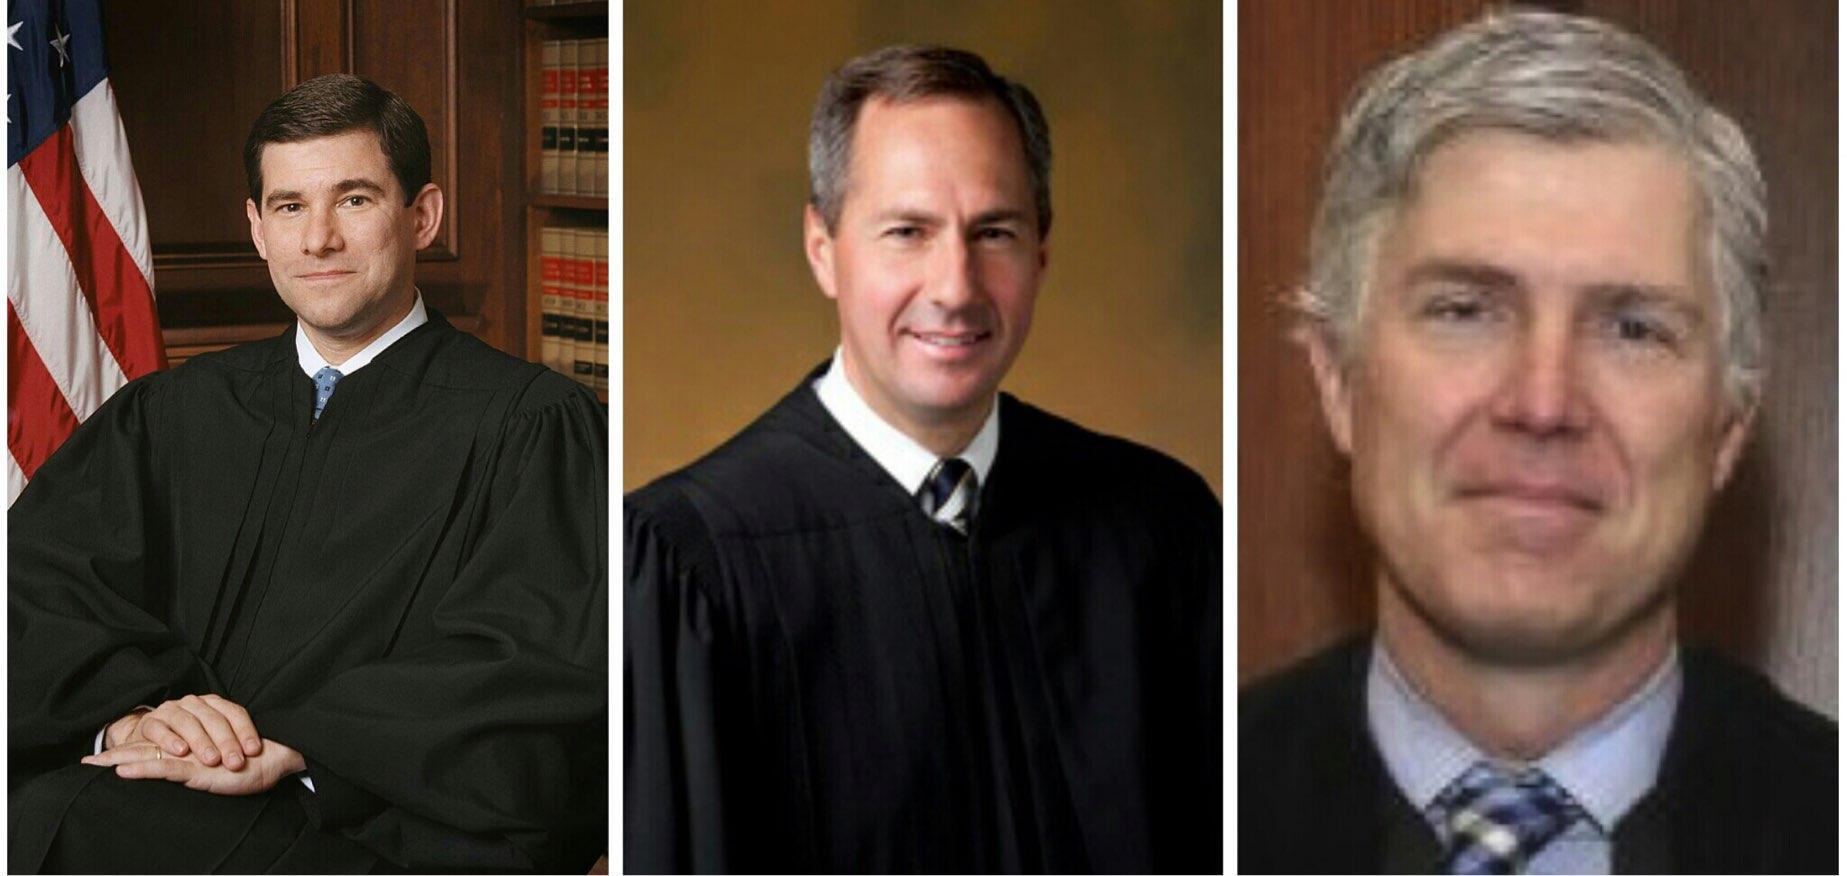 Pictured, from left to right: Judges William Pryor, Thomas Hardiman, and Neil Gorsuch.